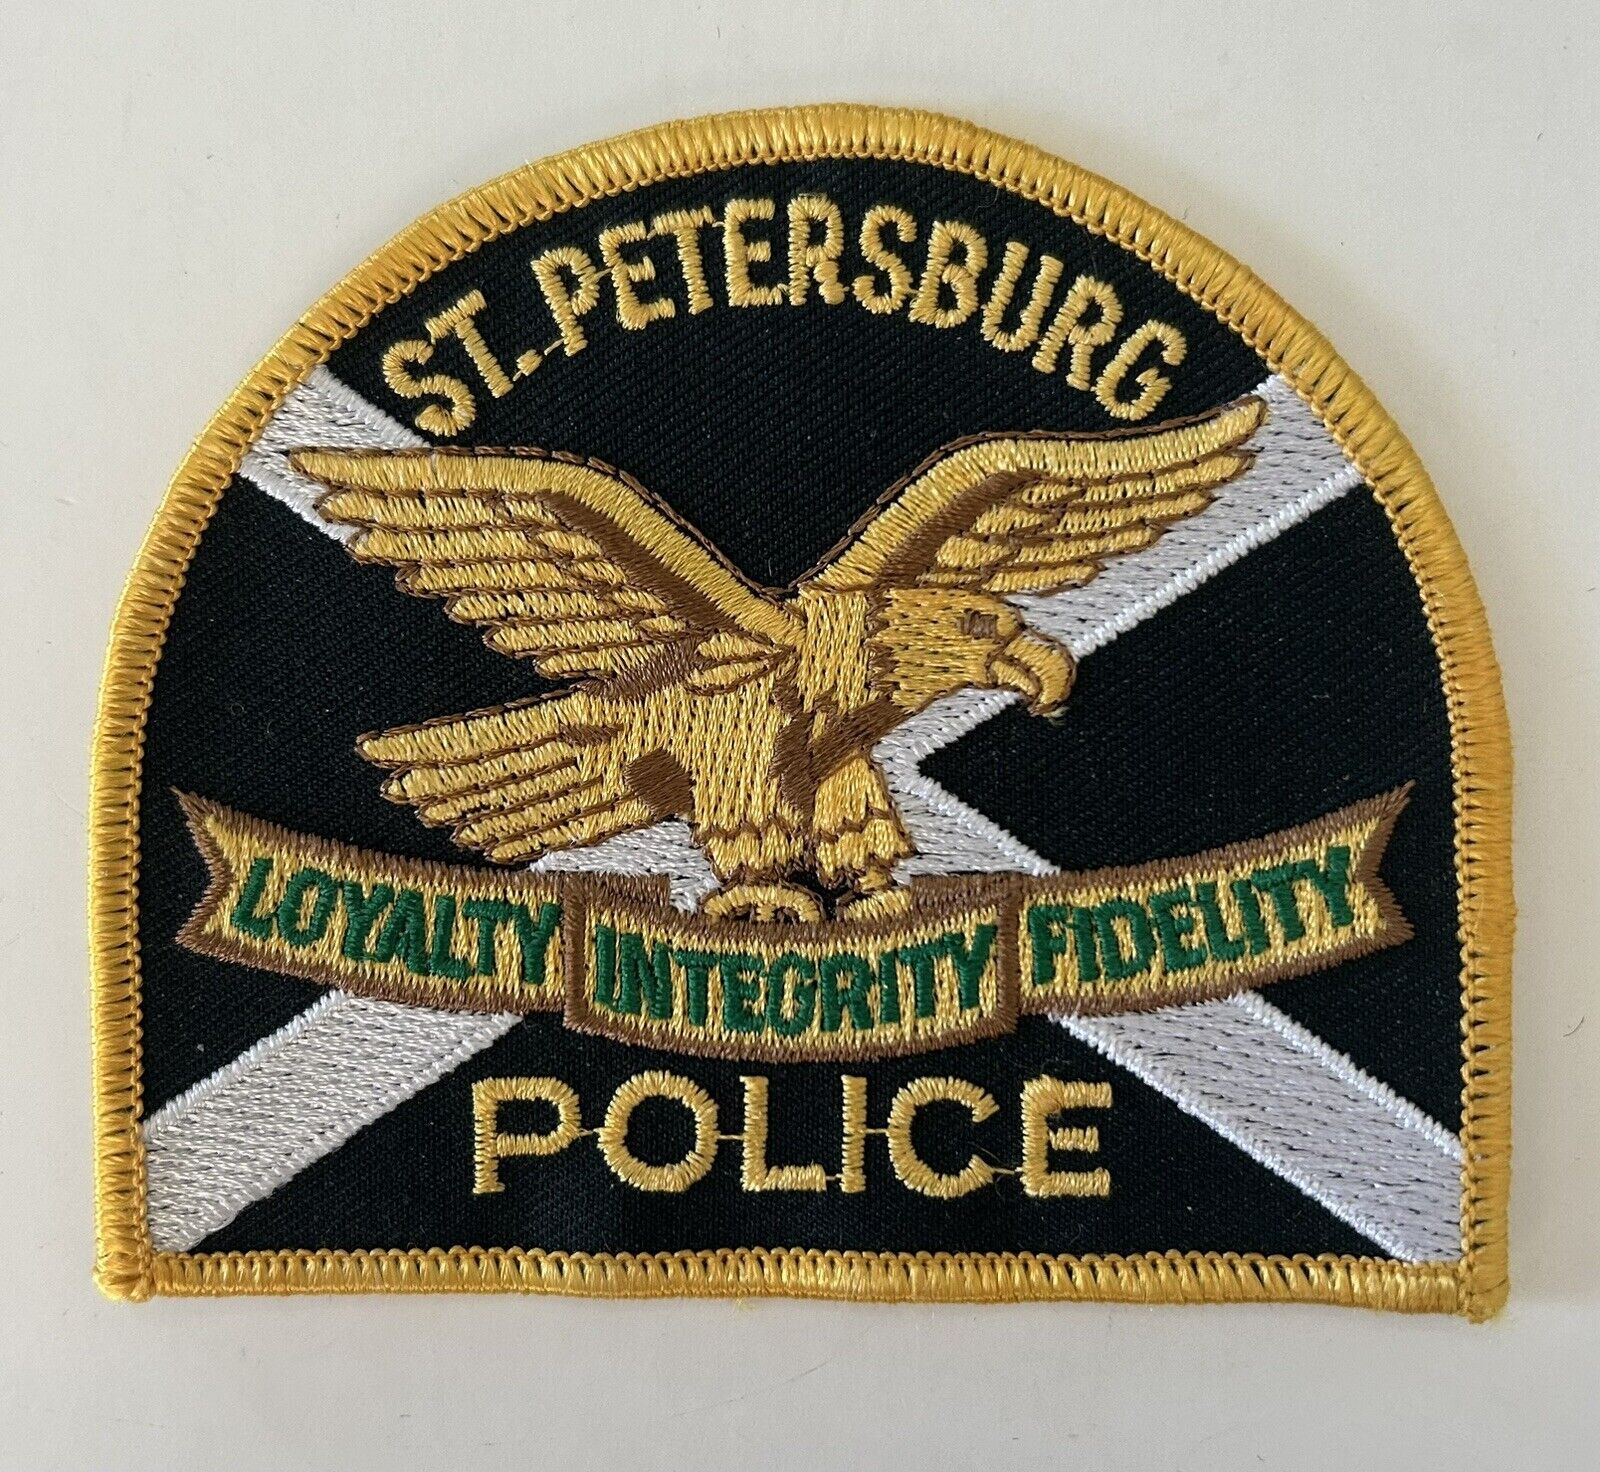 St. Petersburg Florida Police Patch - Loyalty, Integrity, Fidelity